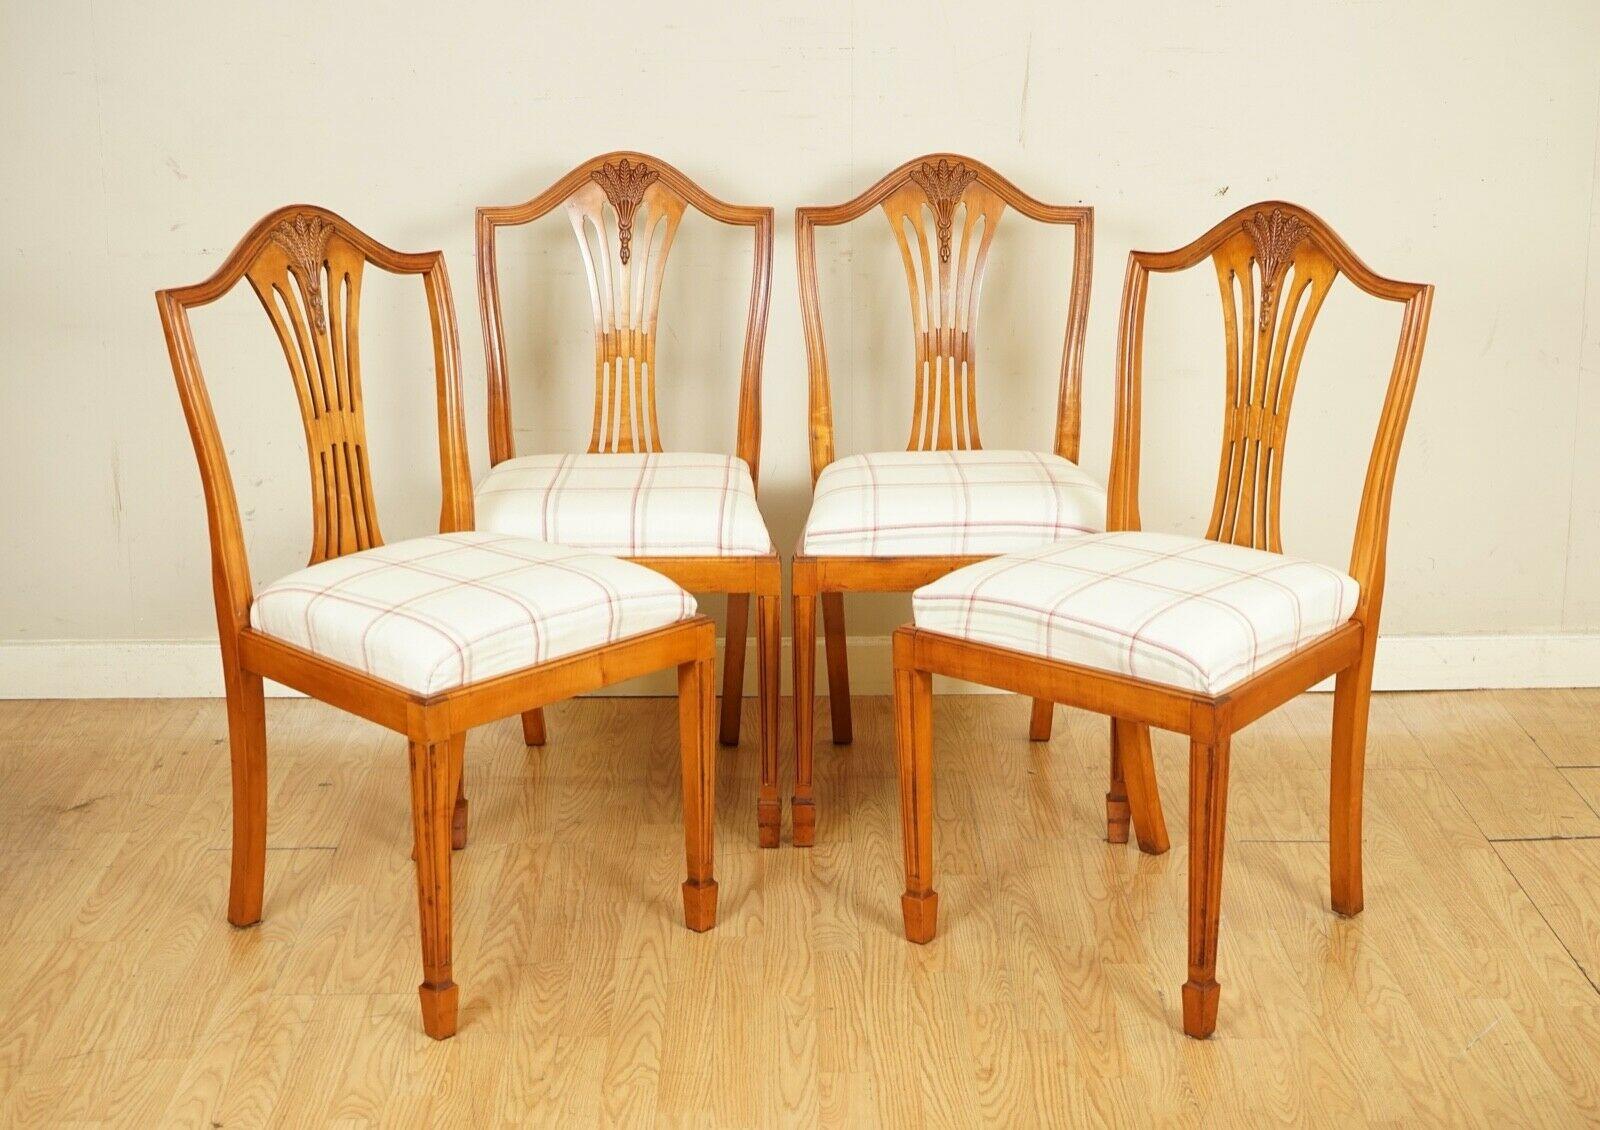 We are so excited to present to you these outstanding Brights of Nettlebed Hepplewhite Wheatear Dining Chairs. 

These have upholstery from Laura Ashley as the previous owner changed them, the seats are all in a good condition only one has a very